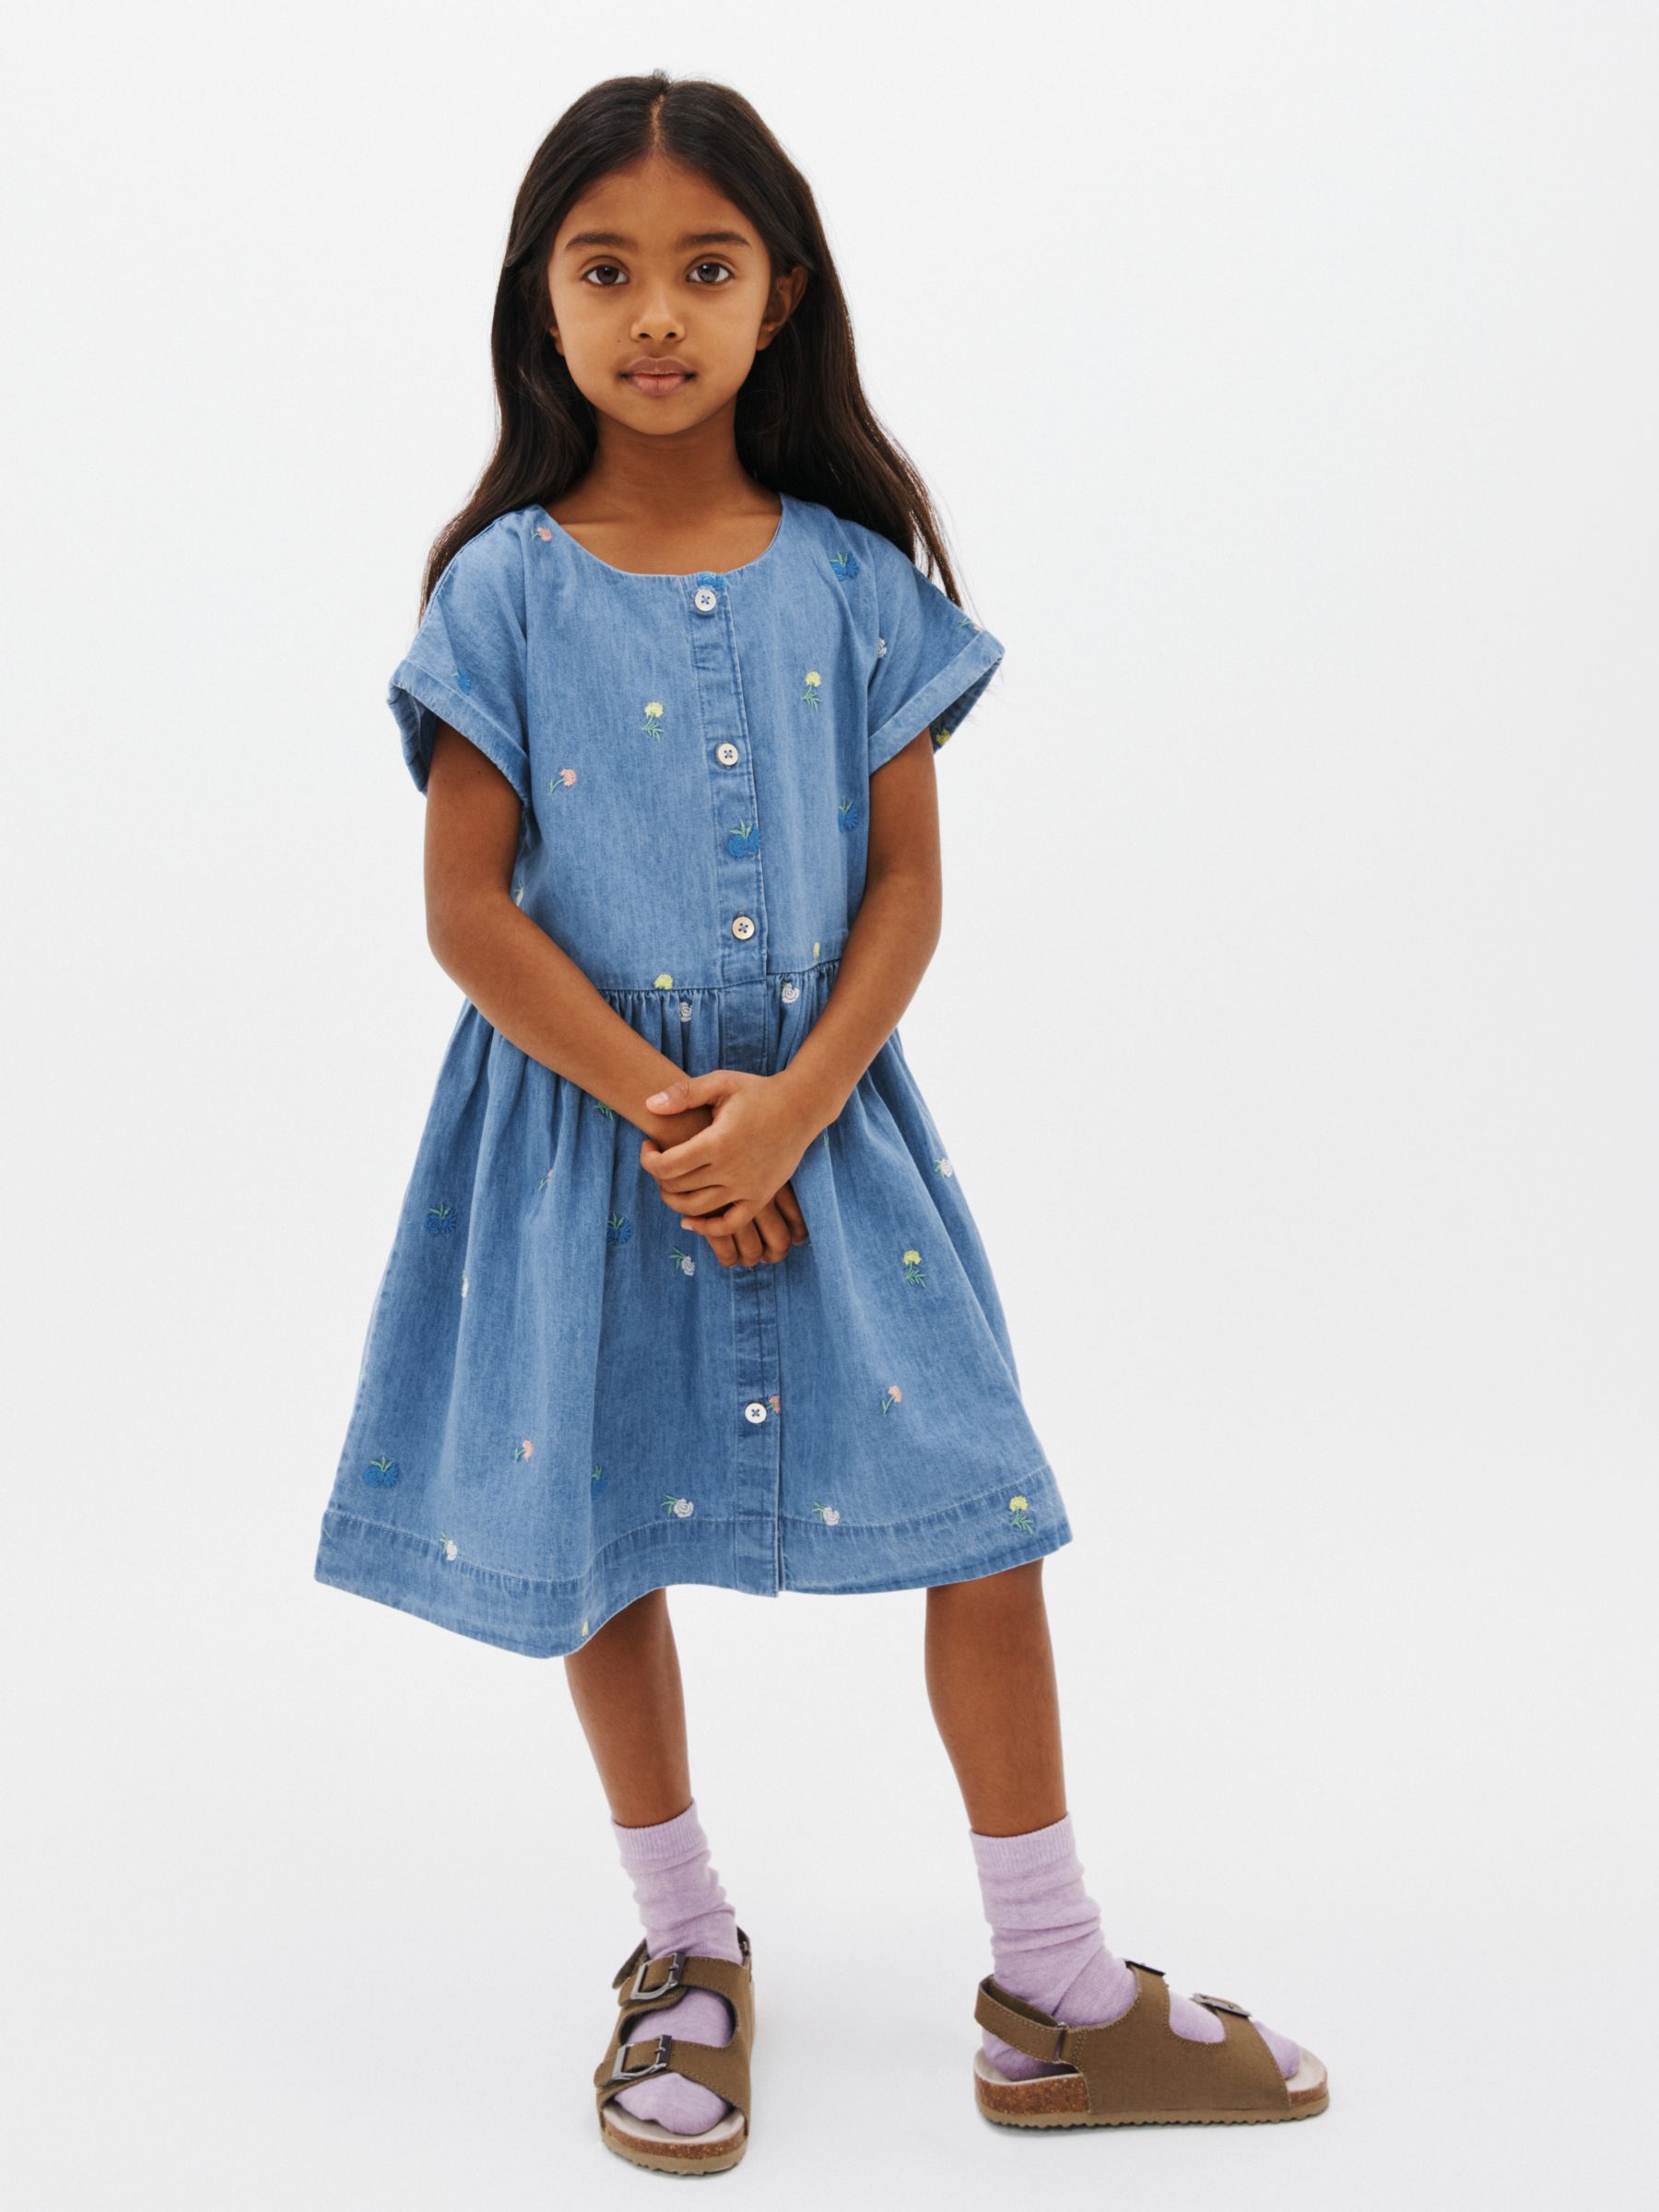 John Lewis Kids' Floral Embroidery Denim Chambray Dress, Mid Wash